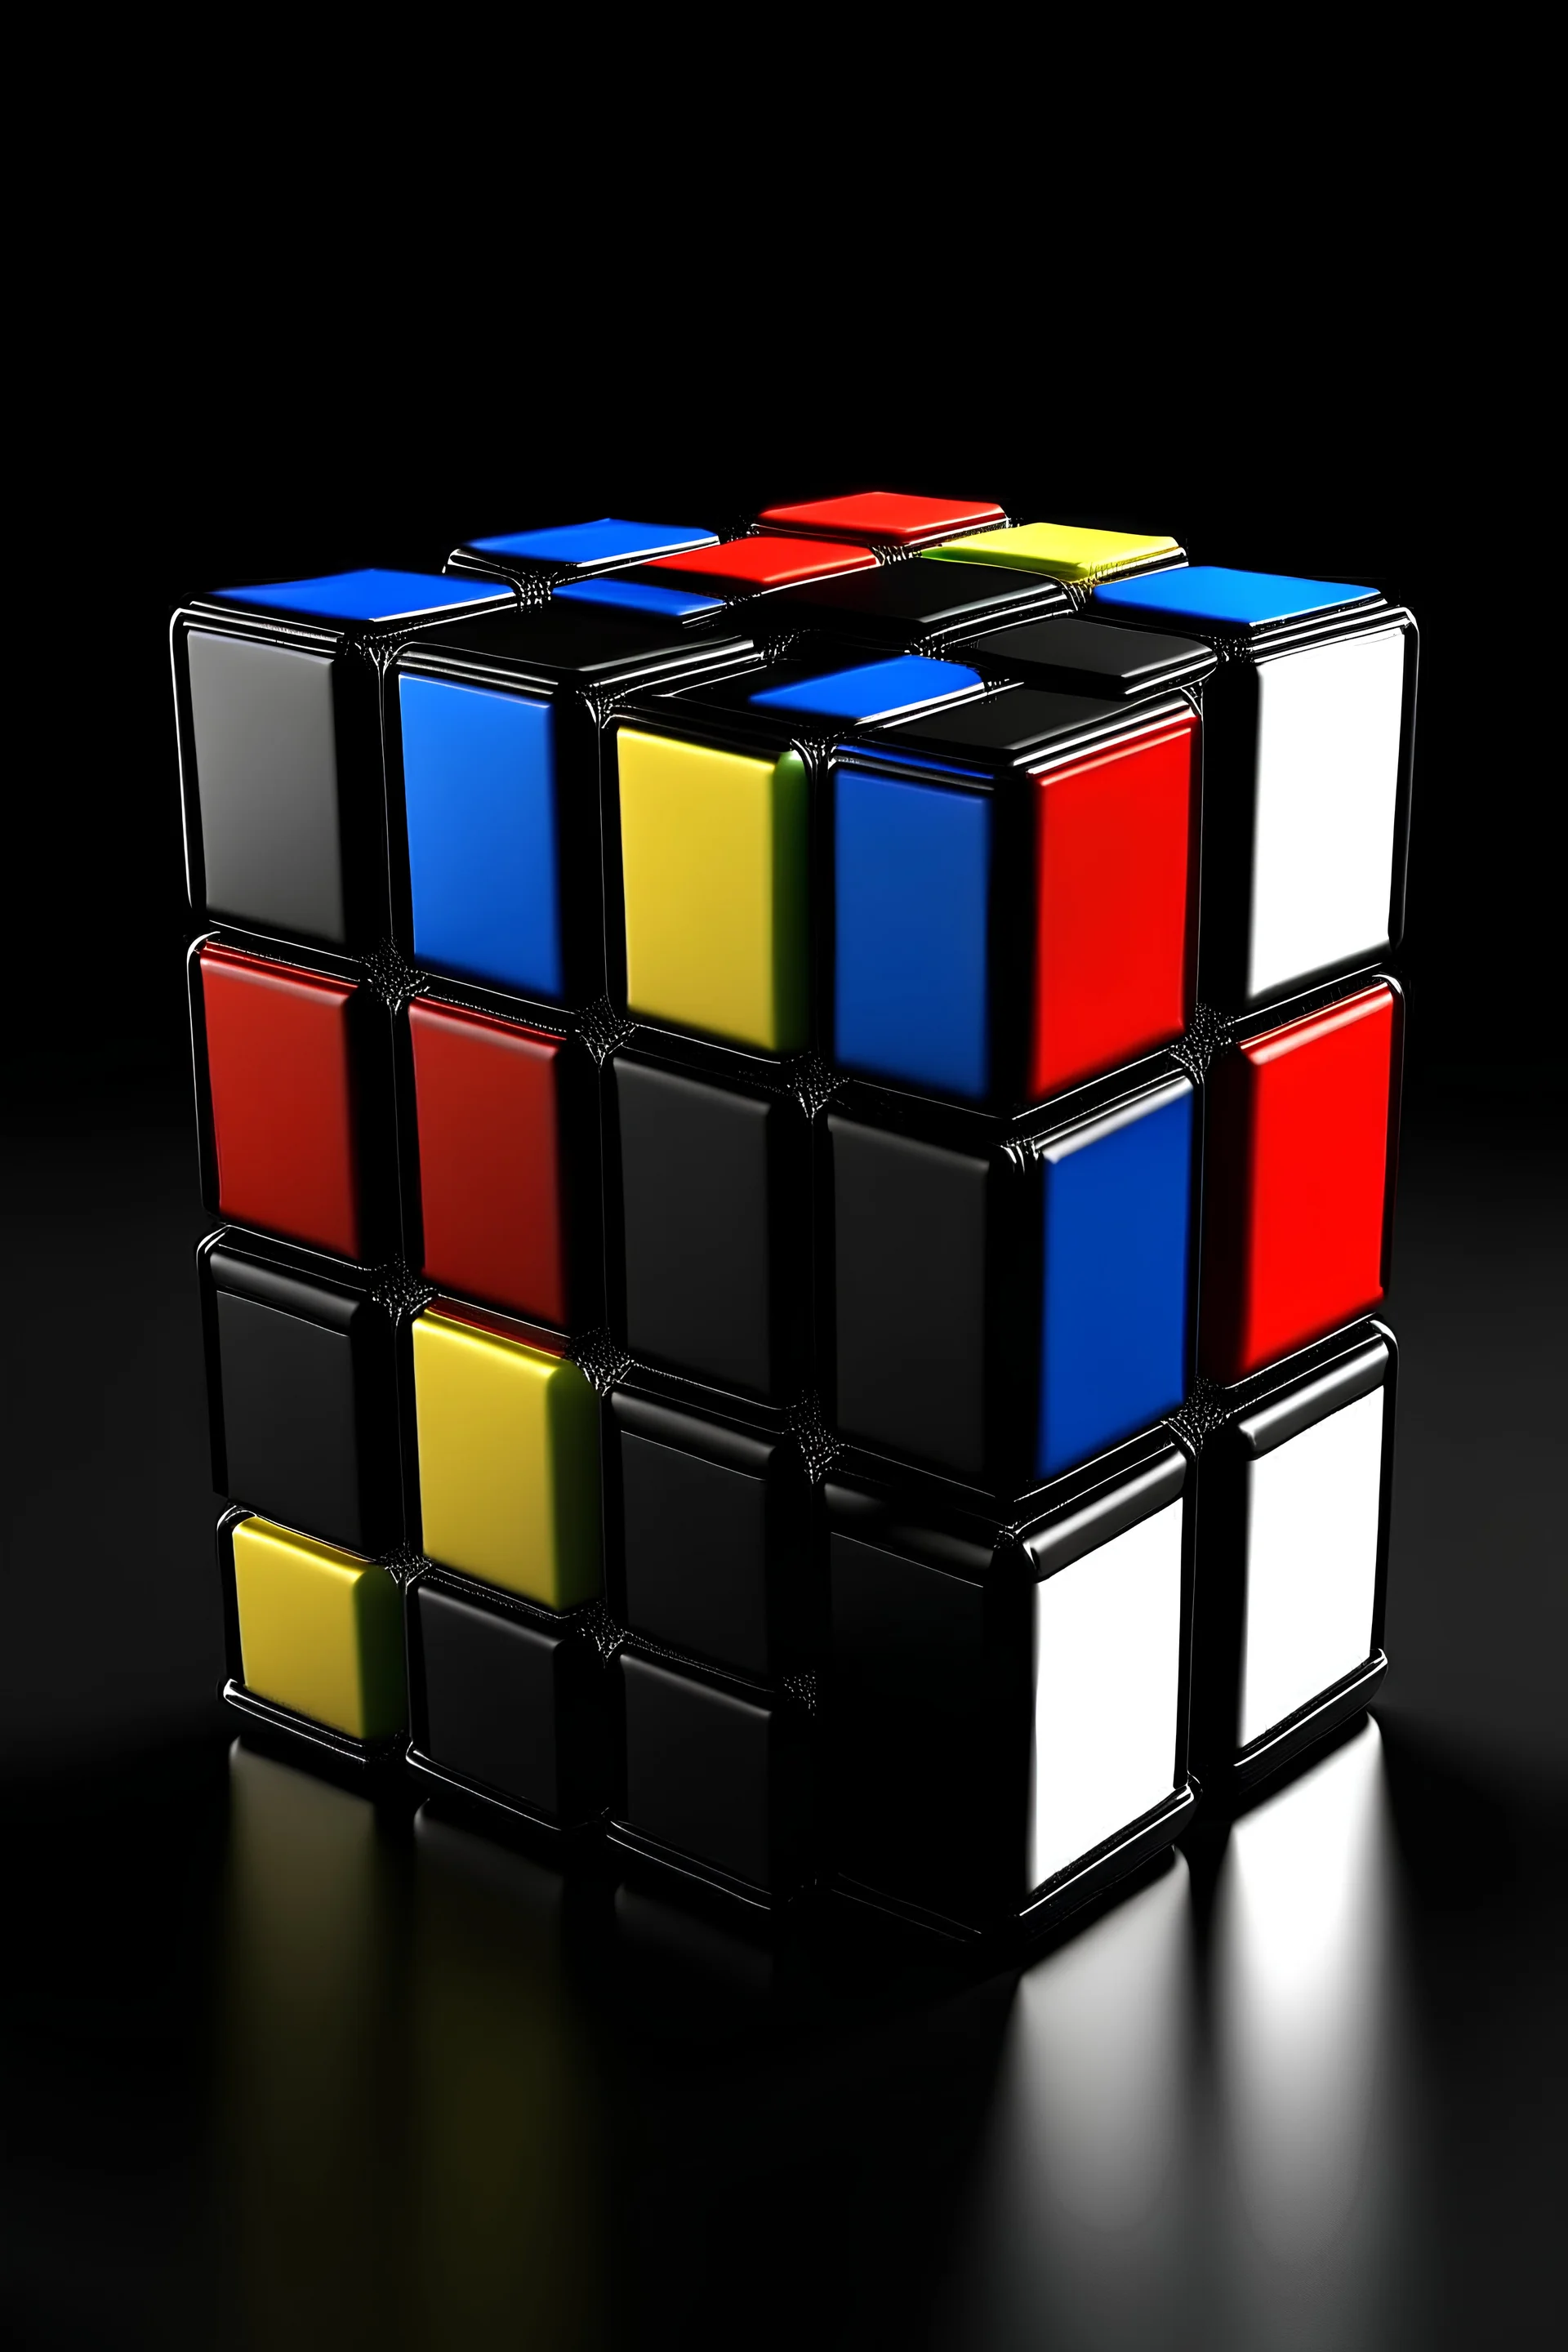 Create a Rubik's Cube with a color scheme inspired by a chessboard. Design six faces, each resembling the alternating dark and light squares of a chessboard. Ensure a visually appealing and coherent design, adding a unique twist to the classic Rubik's Cube. Consider how the cube's aesthetics can enhance the solving experience, drawing inspiration from the strategic nature of chess.